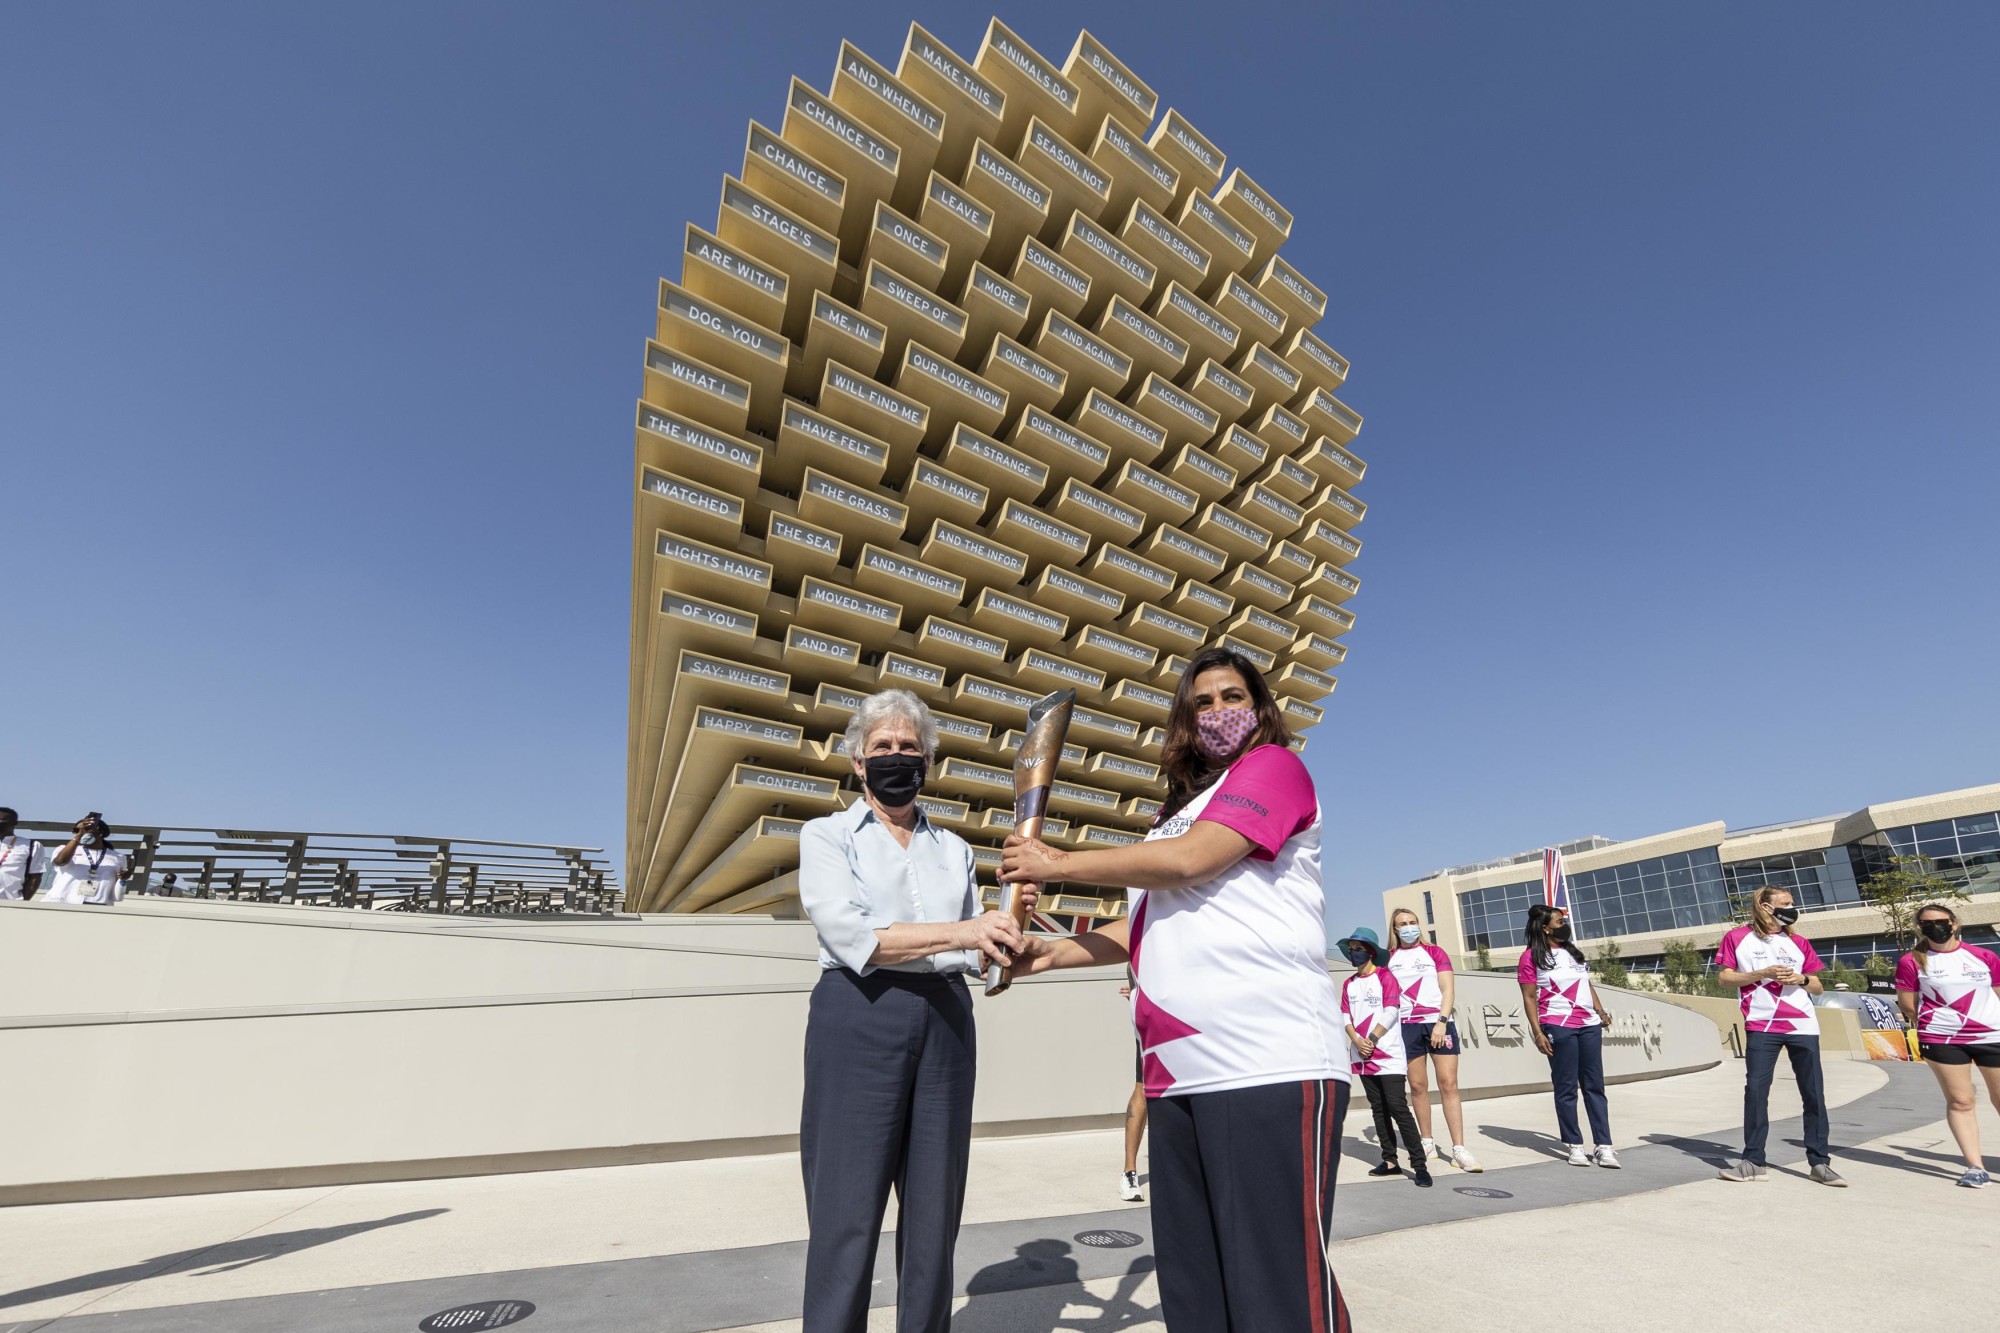 Dame Louise Martin (L), President of the Commonwealth Games Federation hands over the baton to Navkiran Mann (R), Baton Bearer as part of the Queen-s Baton Relay event during the United Kingdom National Day celebrations m46088